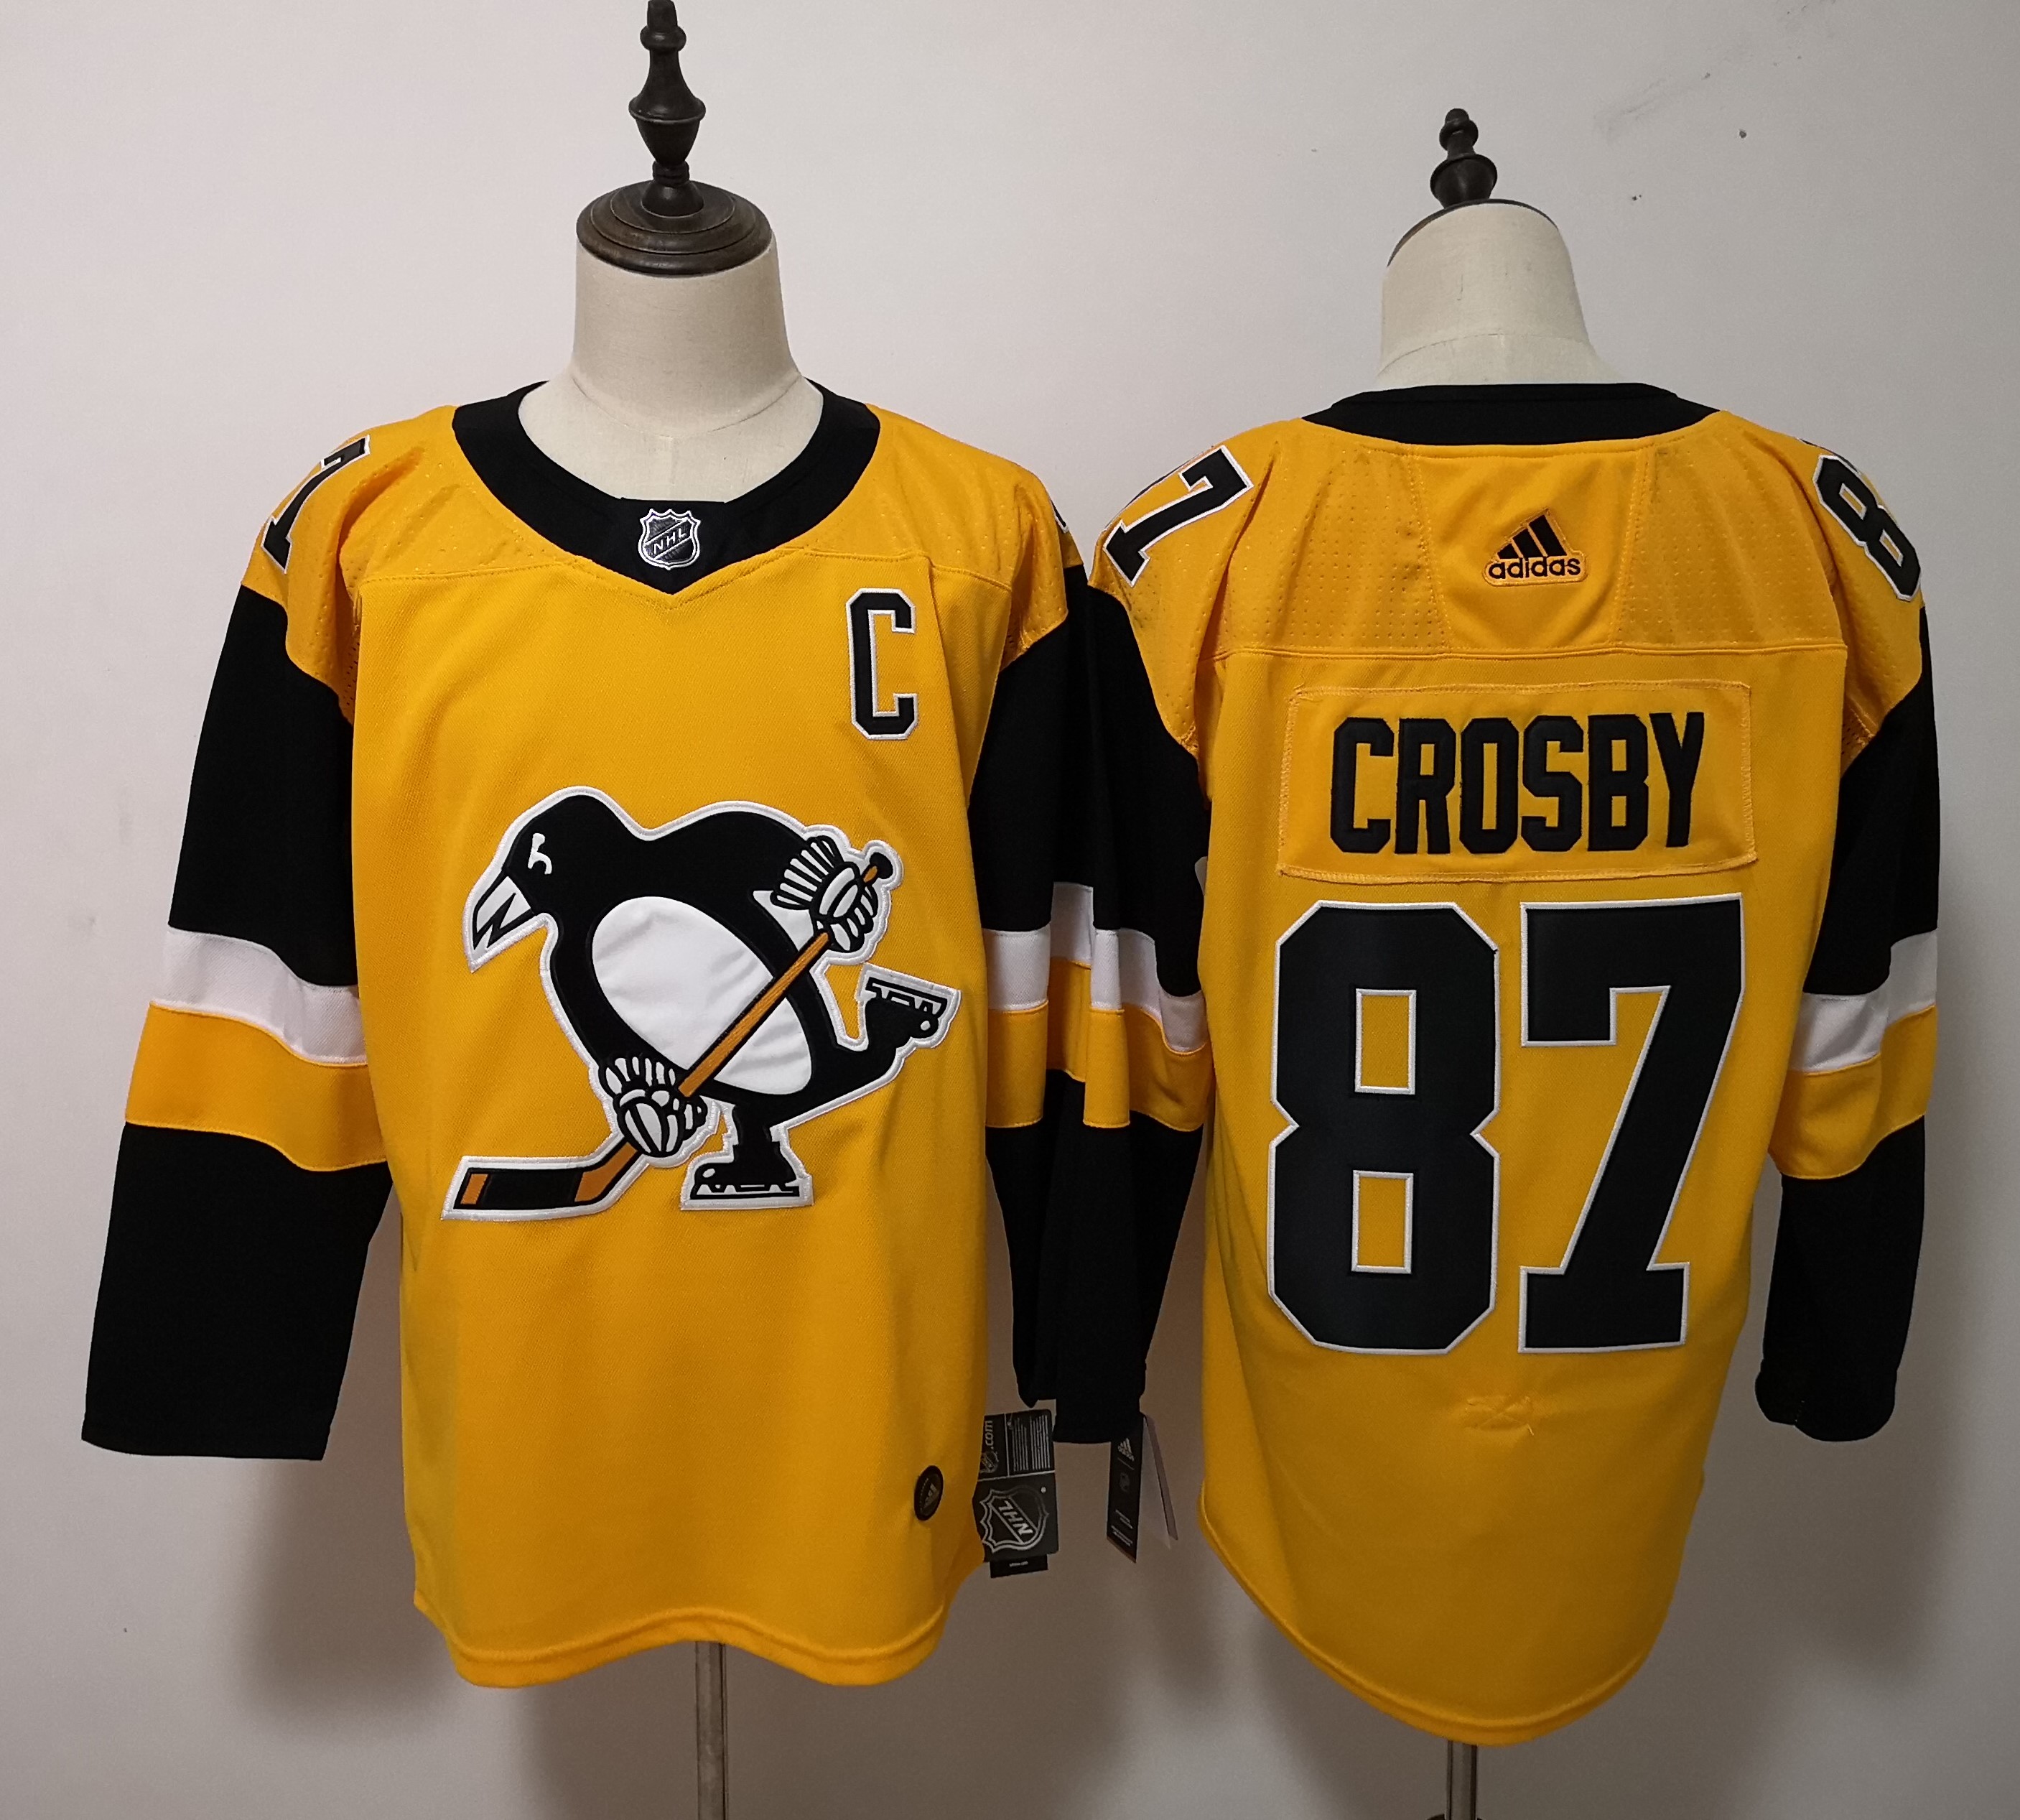 Adidas Men Pittsburgh Penguins #87 Sidney Crosby Yellow Alternate Stitched NHL Jersey